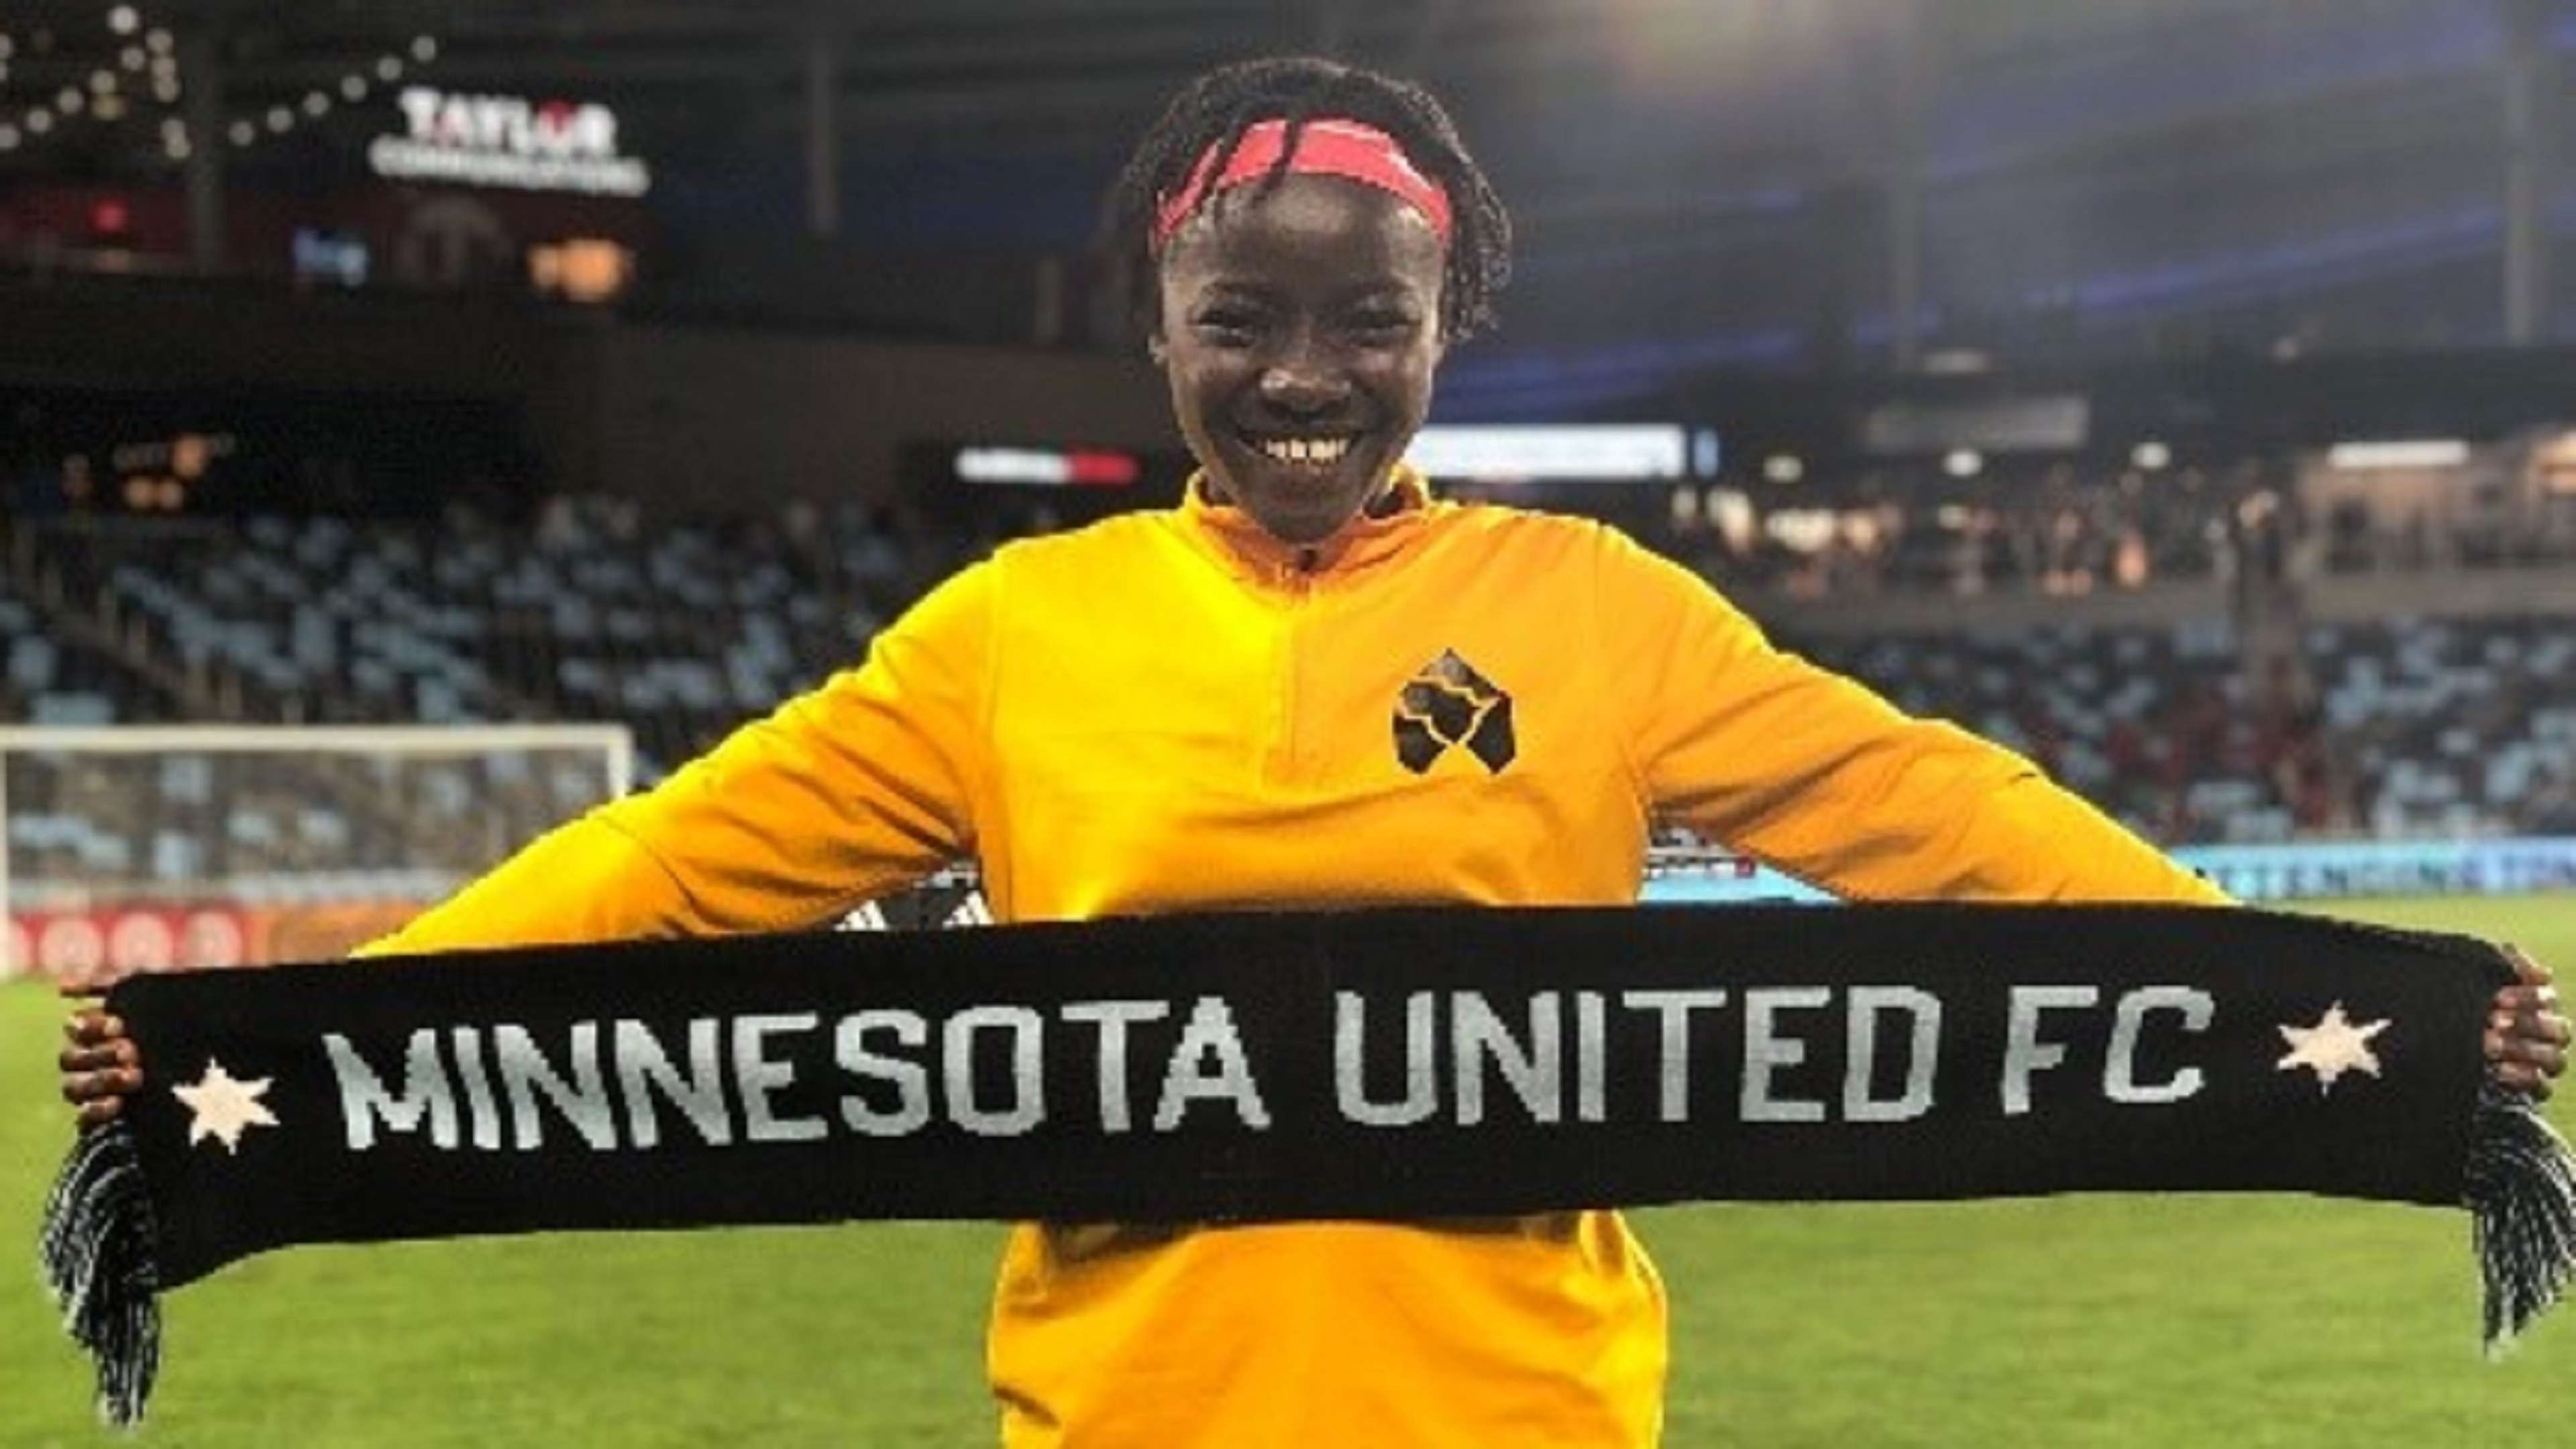 Blessing Kieh at the Minnesota United FC vs Aston Villa game during a USA Cup tour